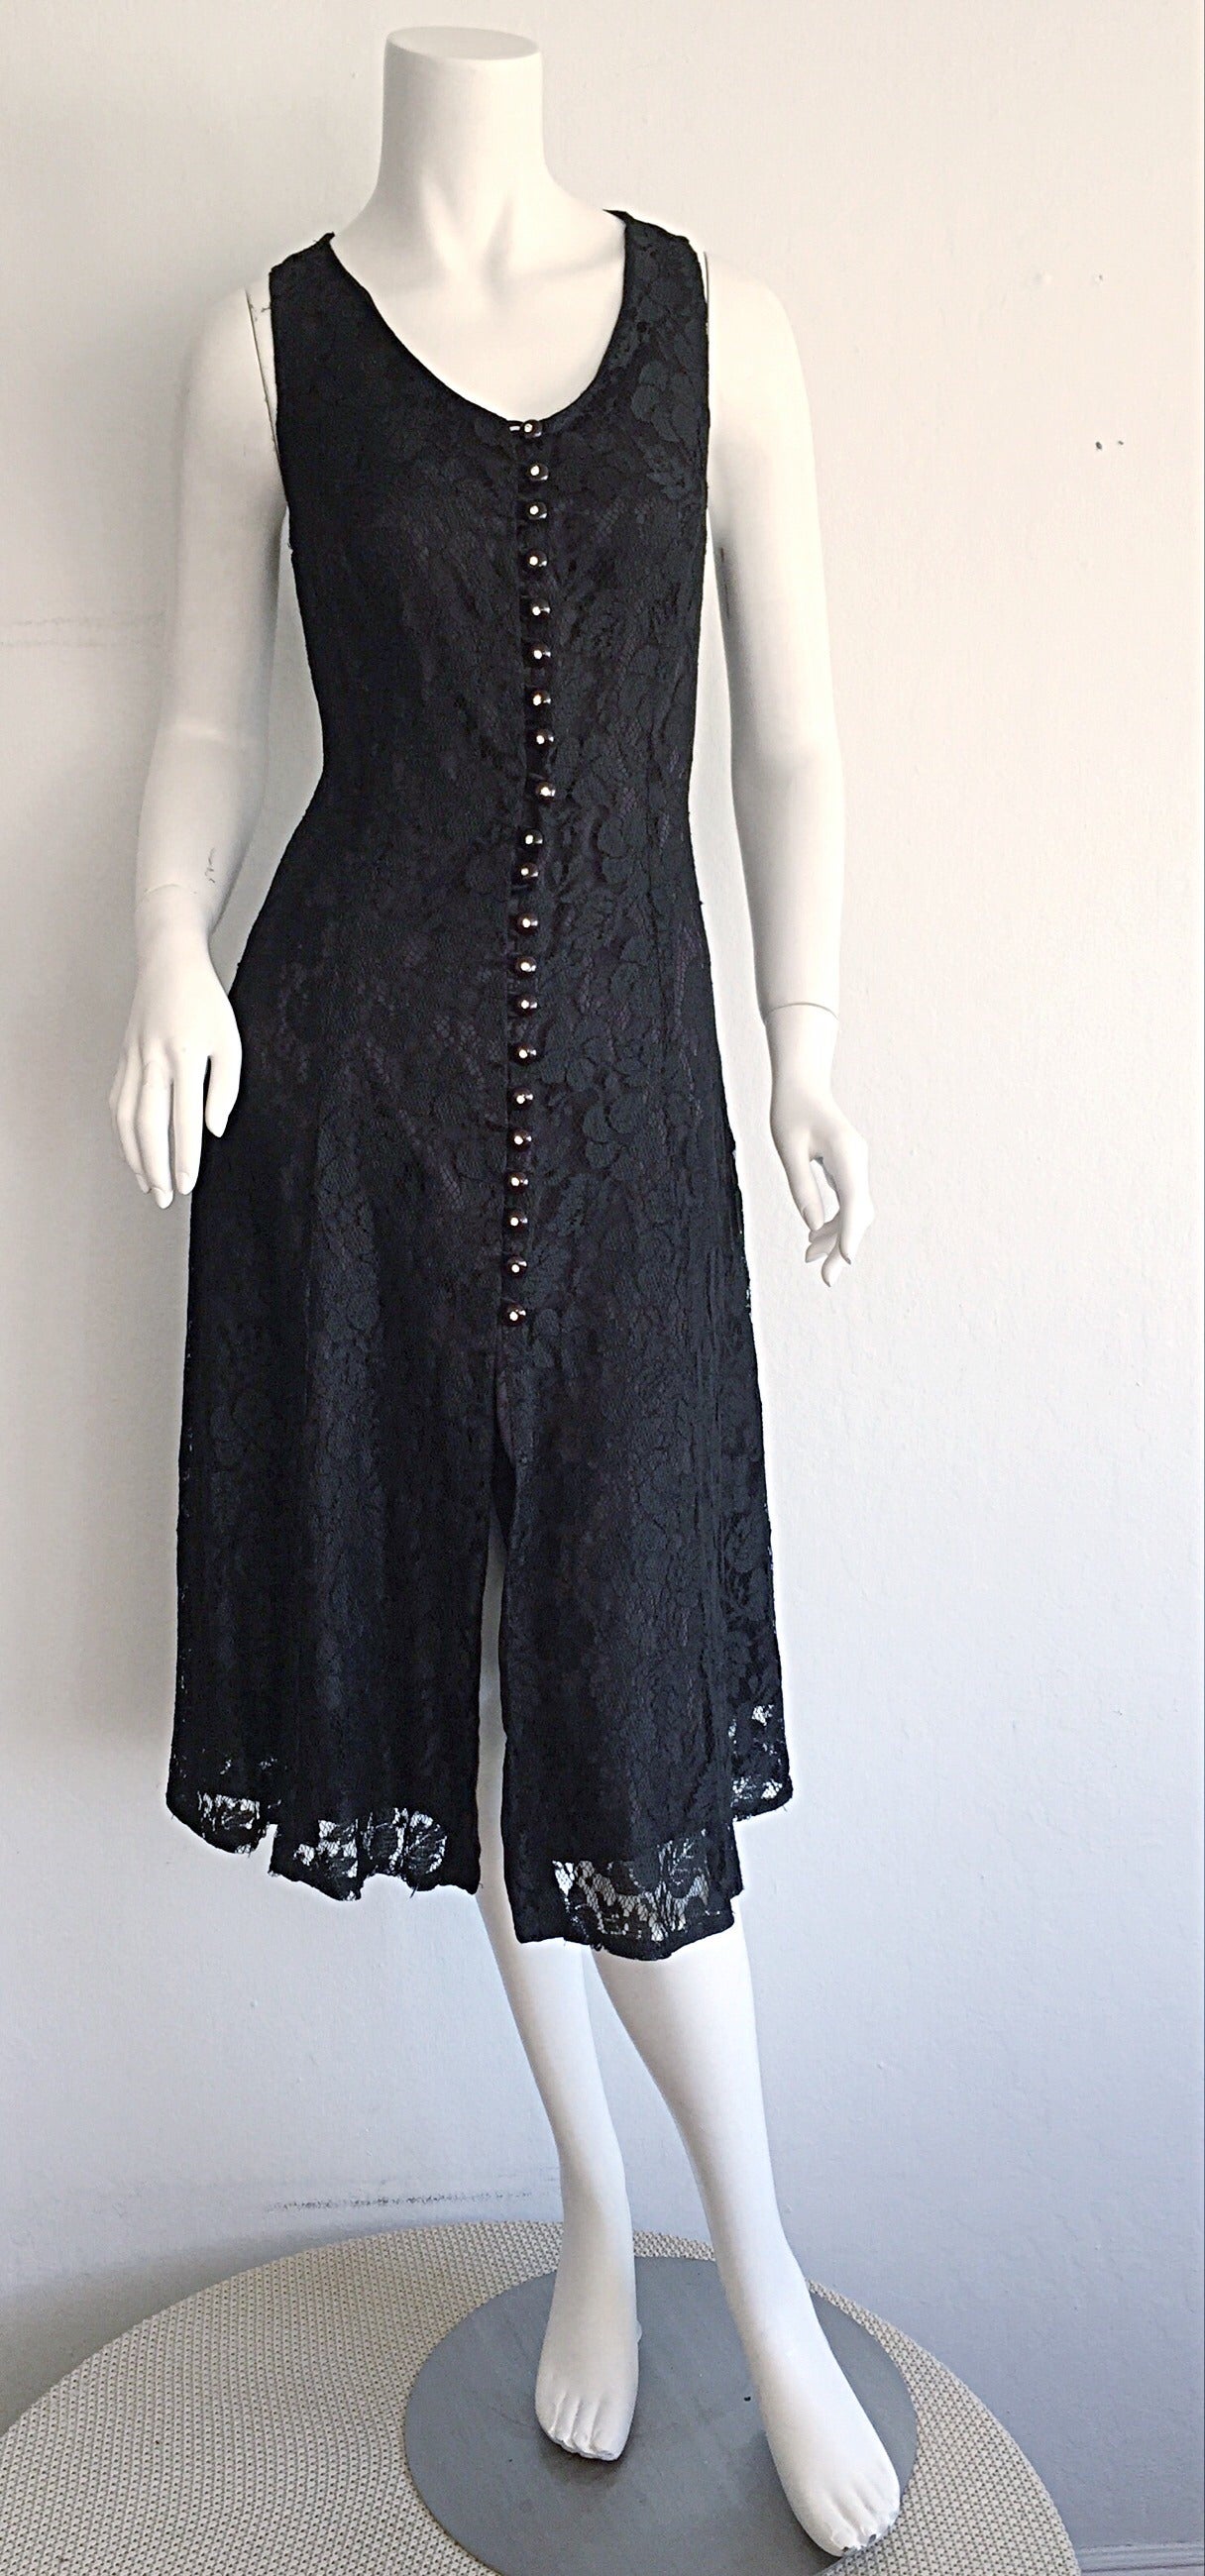 Paco Rabbane 1990s Black Lace Babydoll Dressw/ Rhinestone Buttons For Sale 2